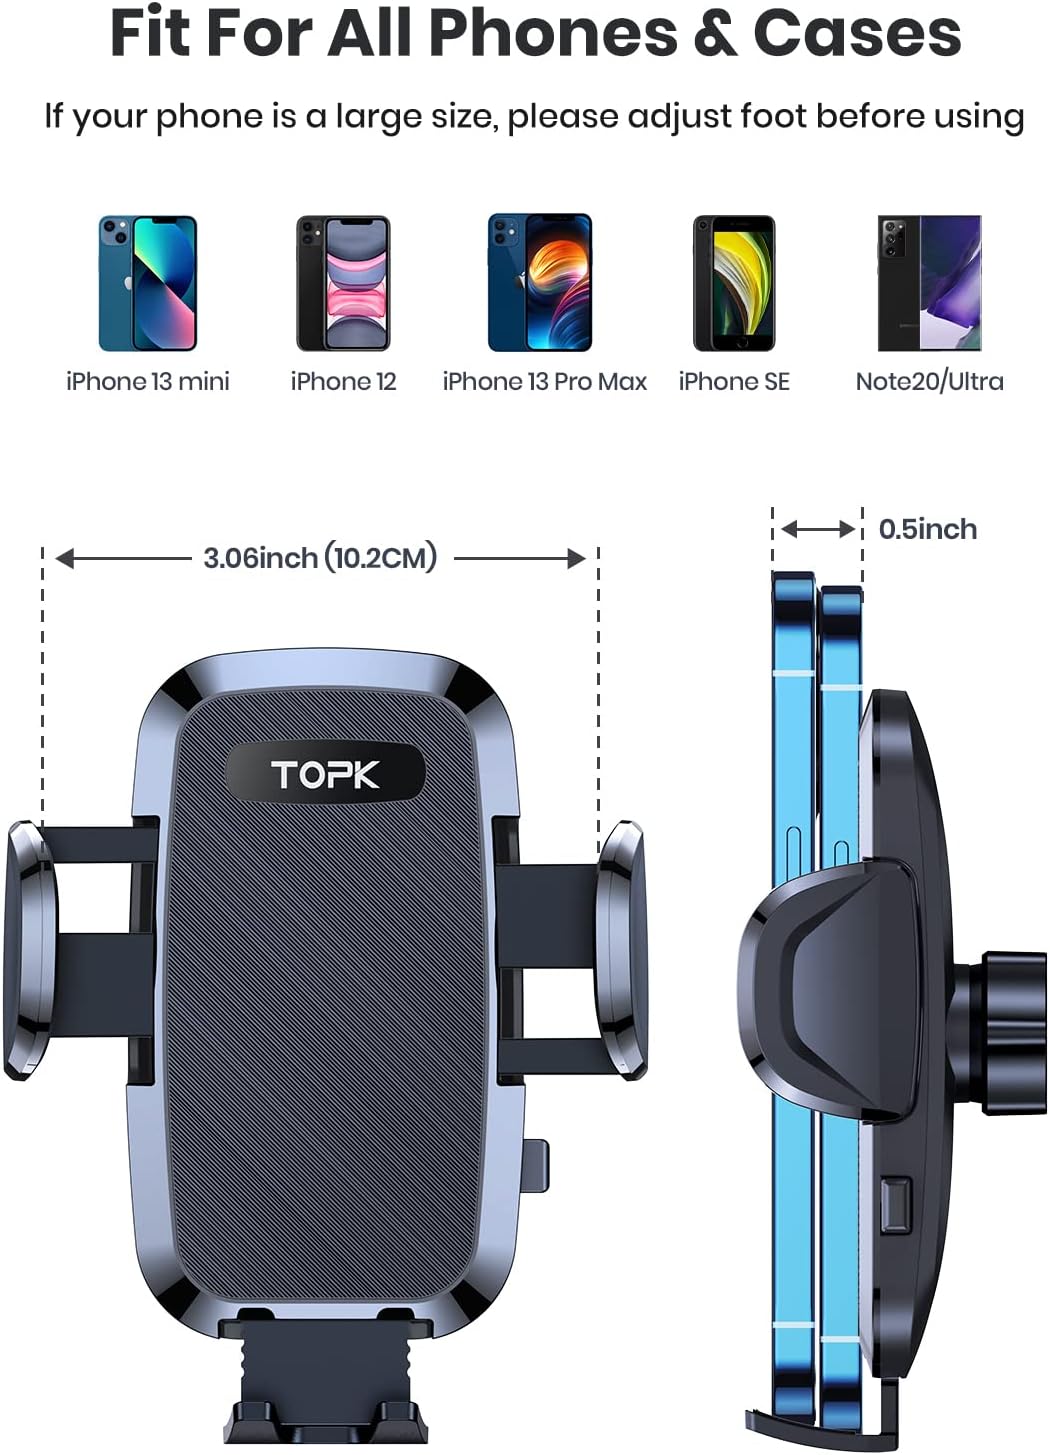 TOPK Car Phone Holder, Phone Holder for Cars Dashboard/Windscreen Adjustable 360° Rotation Upgraded Strong Suction Car Phone Mount for All 4.7 to 6.8 inch Smartphones - Amazing Gadgets Outlet